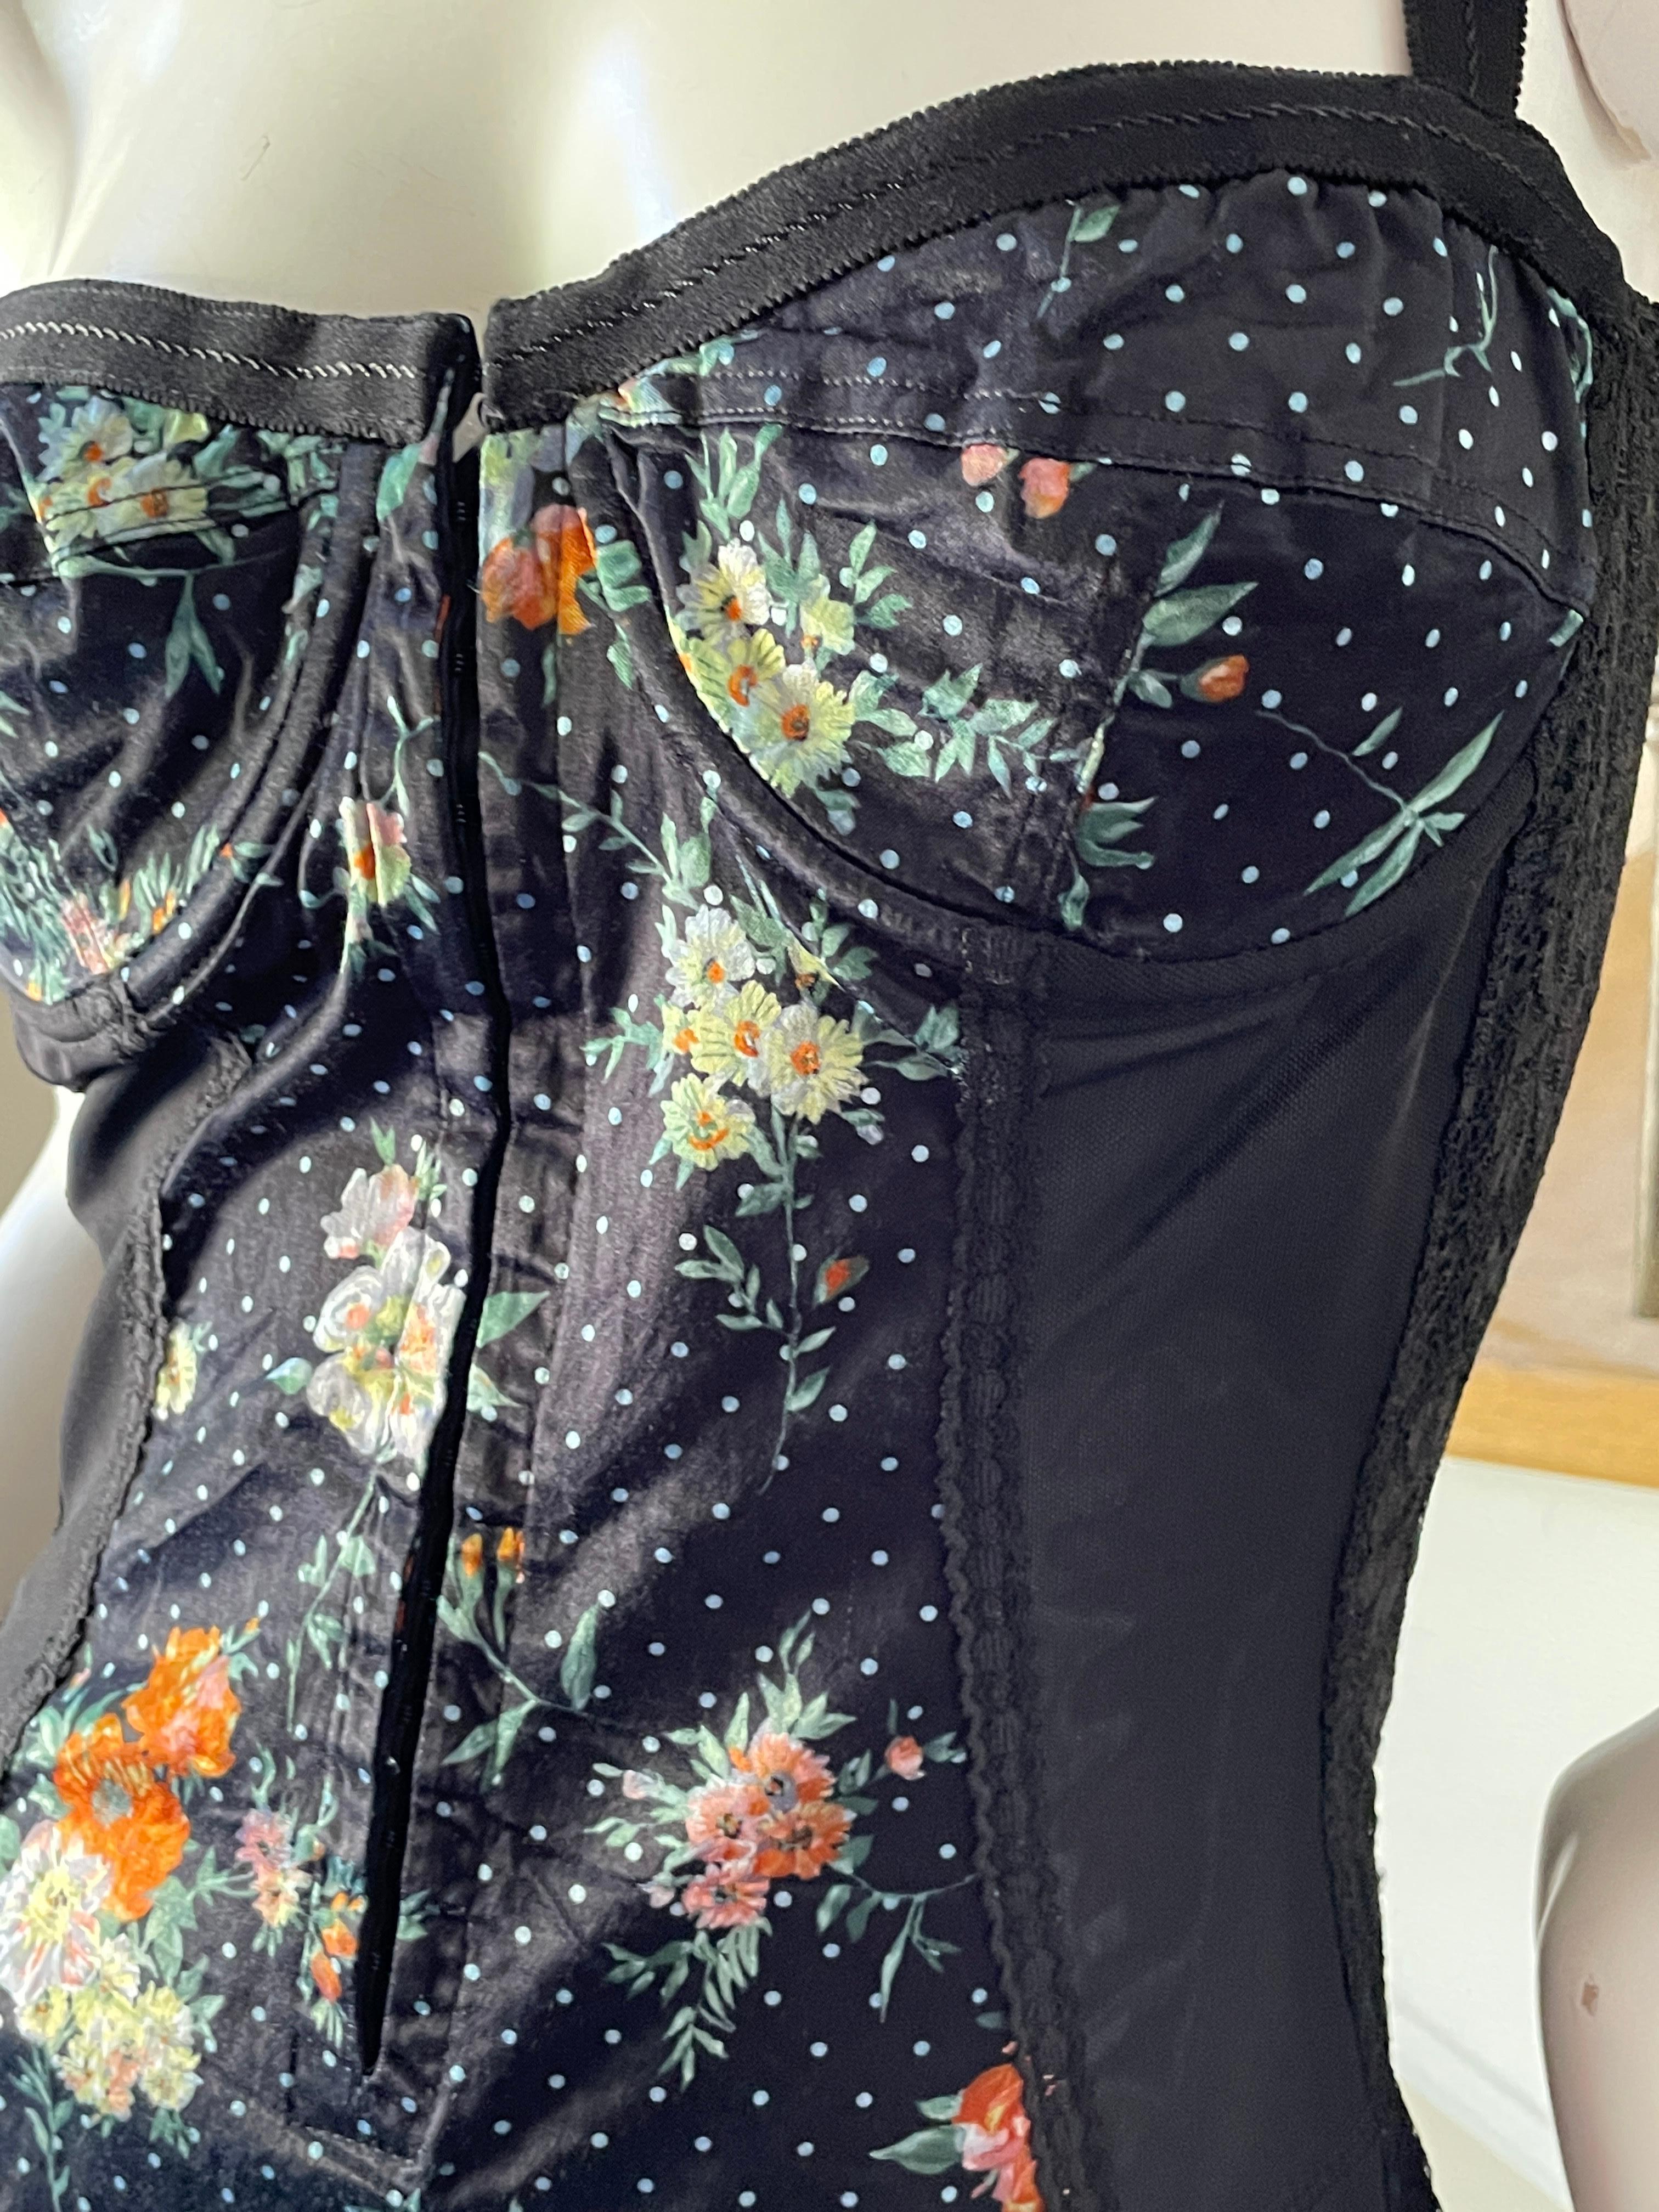 D&G Dolce & Gabbana Floral Print Corset Cocktail Dress  In Excellent Condition For Sale In Cloverdale, CA